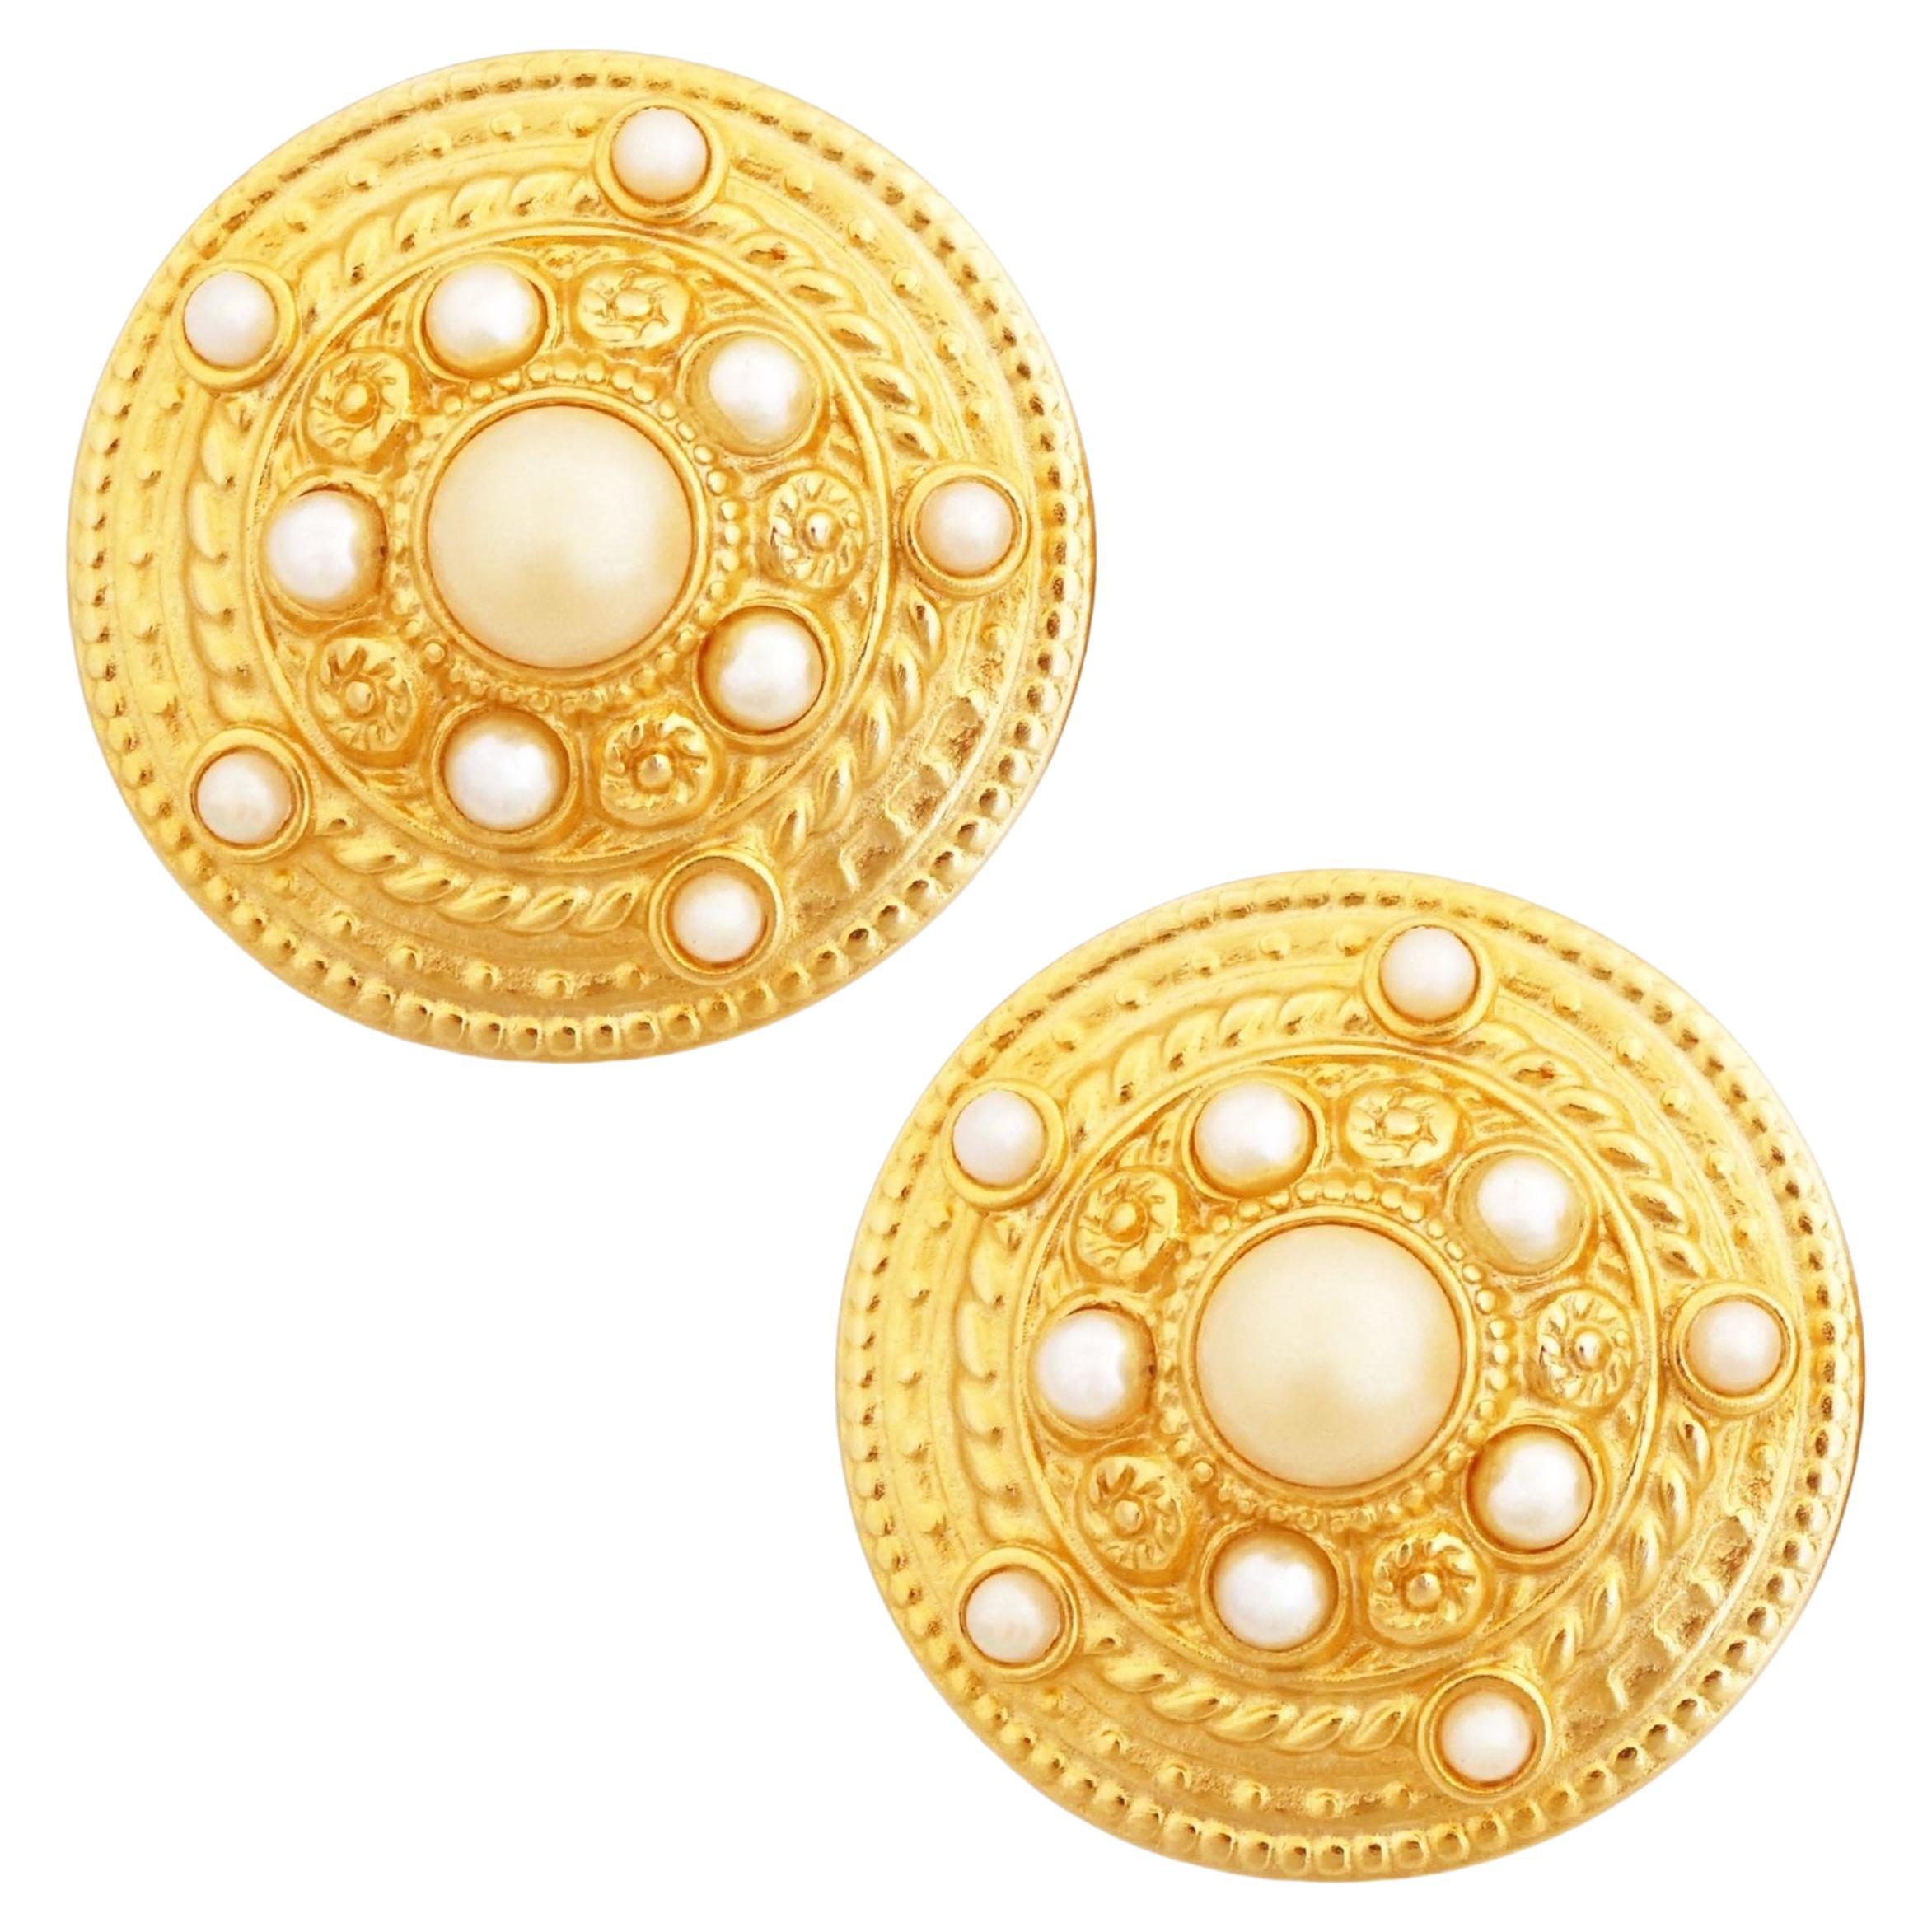 Gilded Etruscan Medallion Statement Earrings With Faux Pearls By Ben-Amun, 1980s For Sale